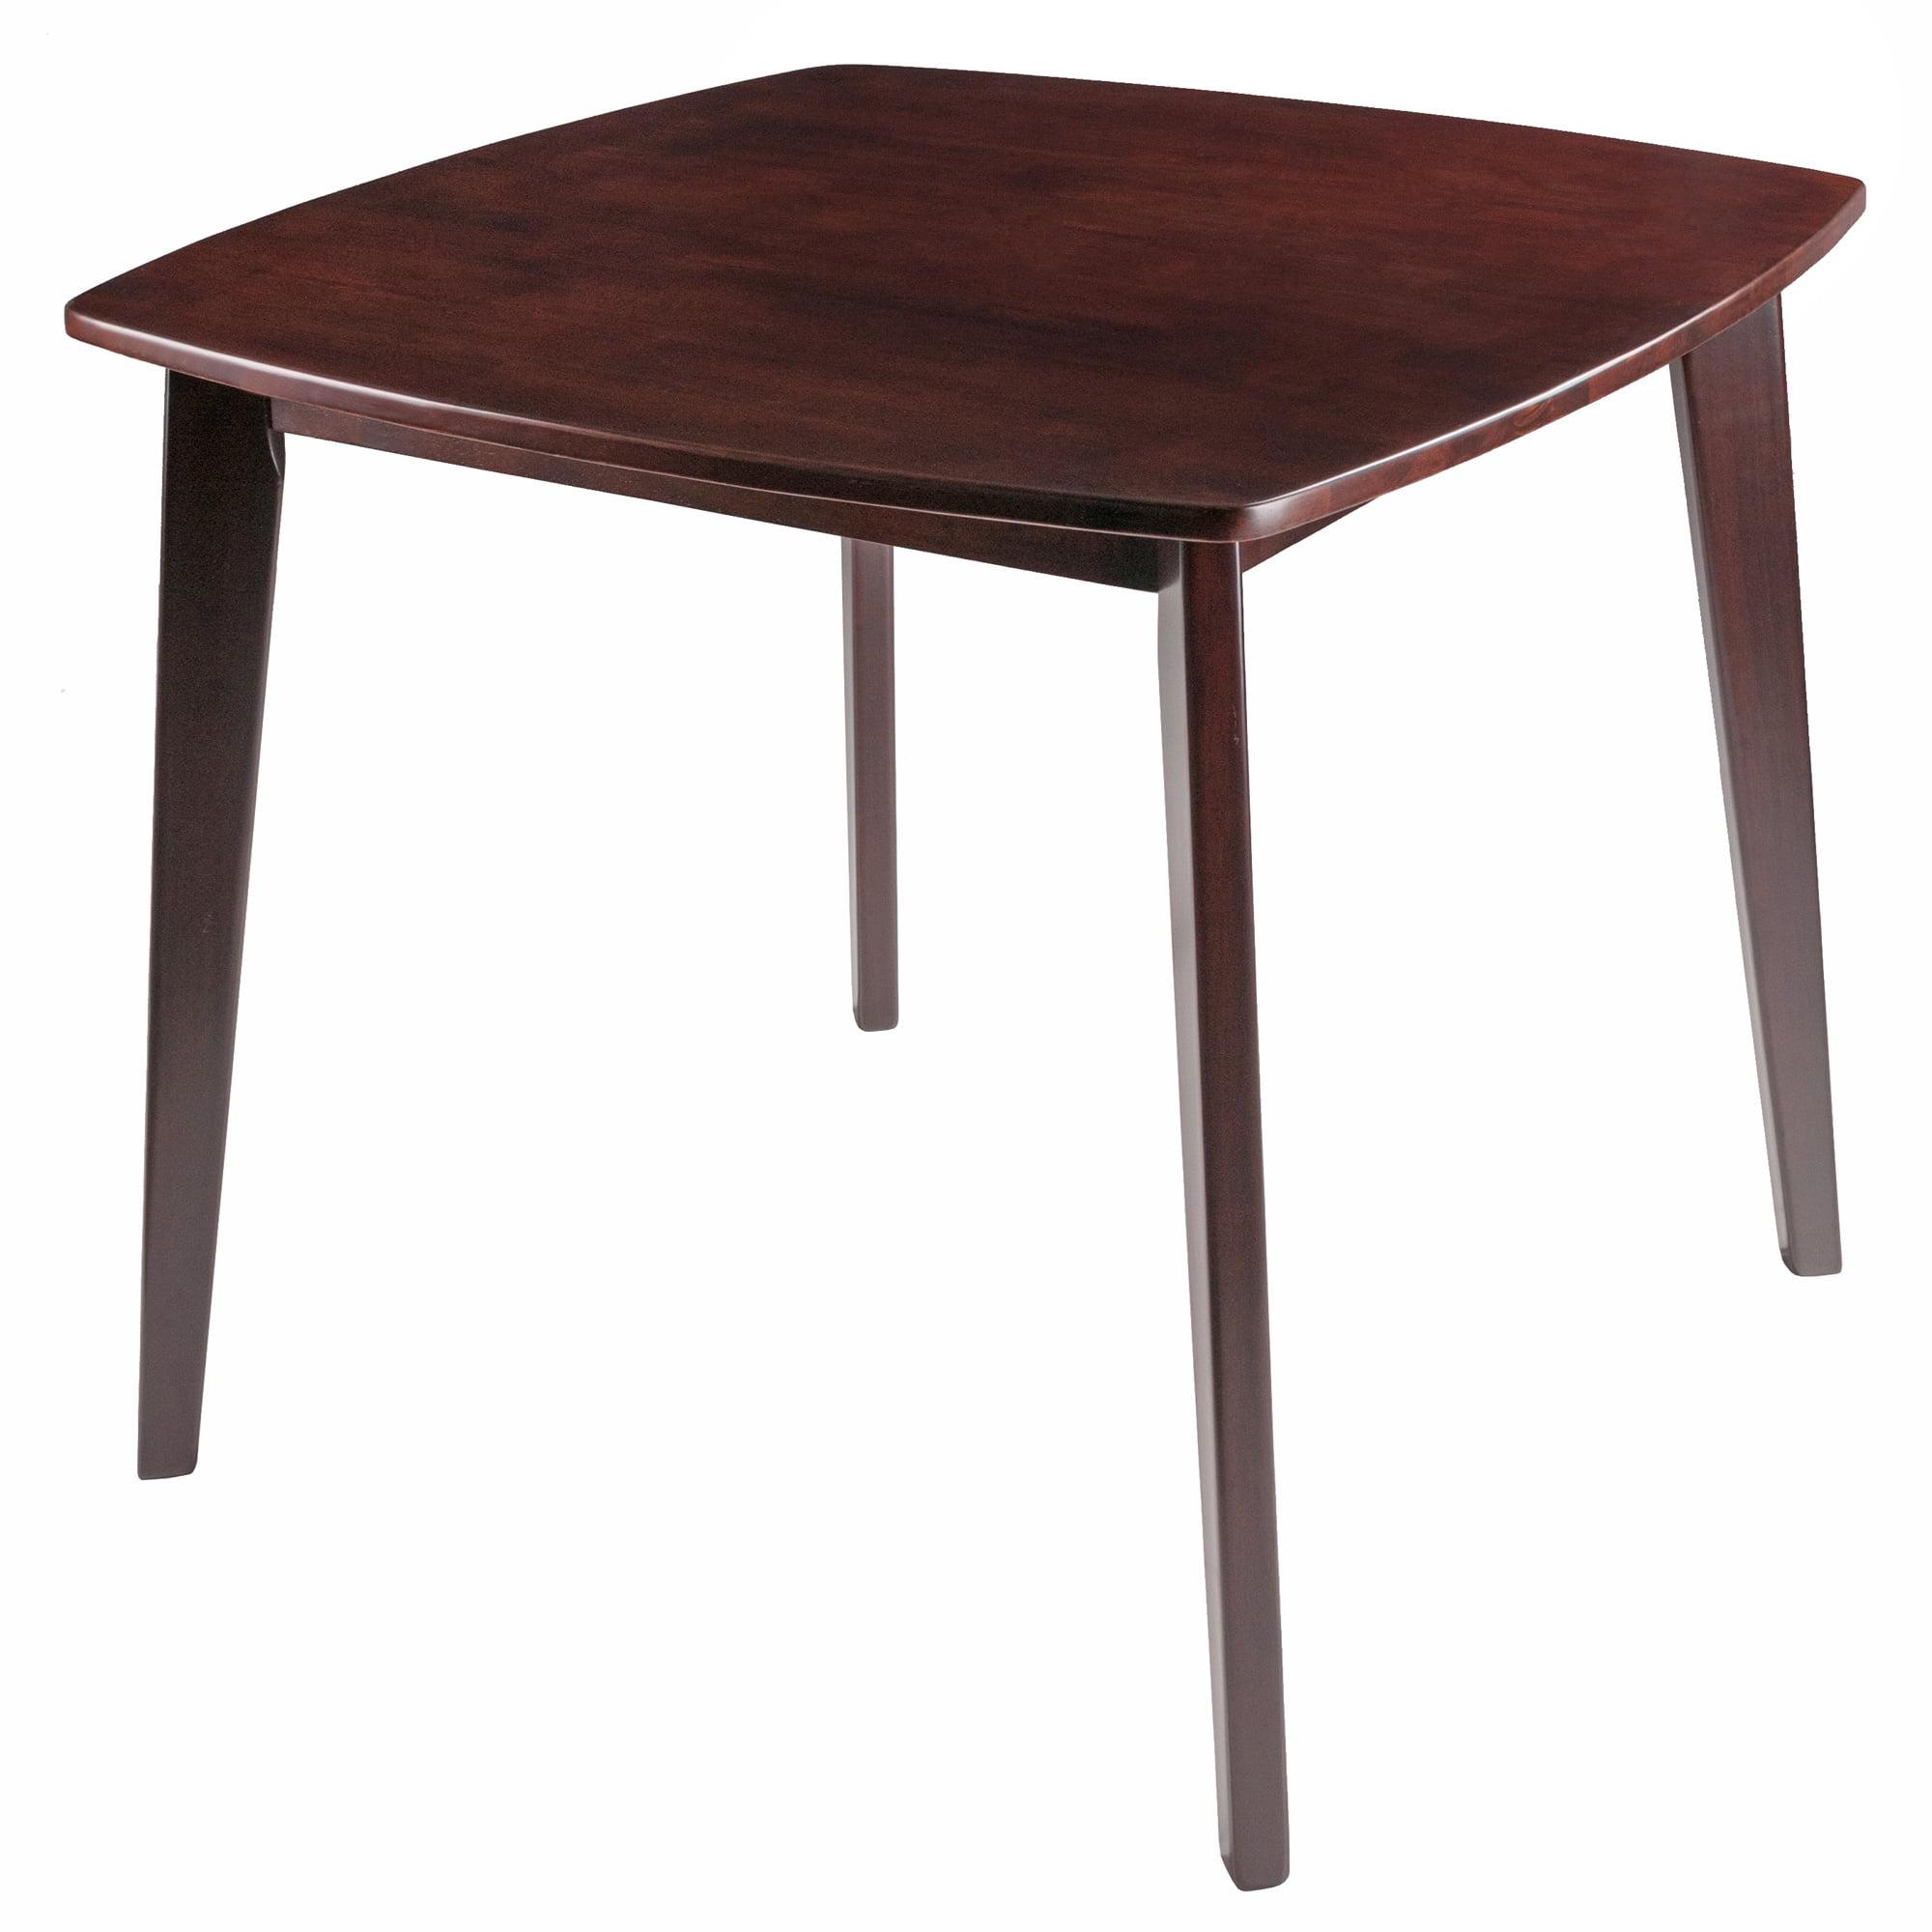 Transitional Square Walnut Dining Table with Tapered Legs